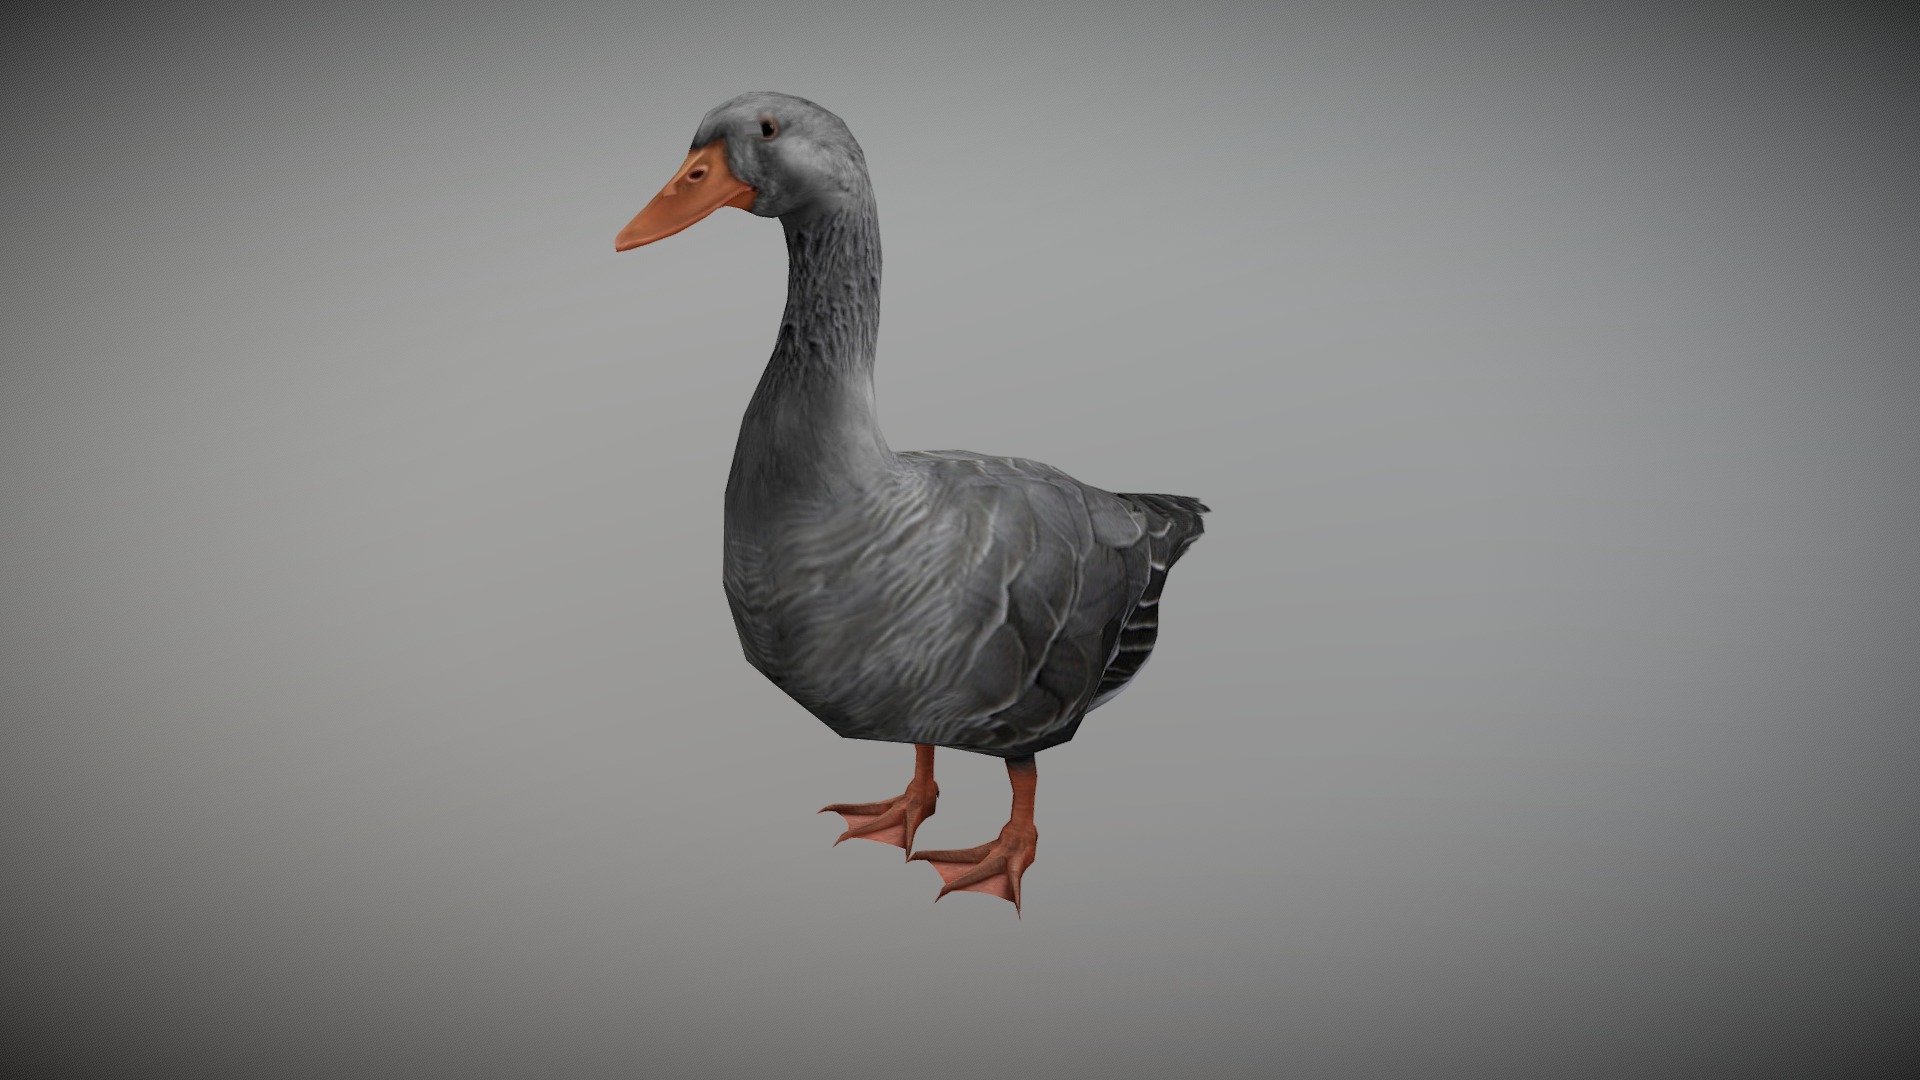 WATCH  = https://youtu.be/YPd2jEqNUhY

3D Realistic Gray Duck with Animations


PACKAGE INCLUDE



High quality polygonal model, correctly scaled for an accurate representation of the original object.

Model is built to real-world scale.

Many different format like blender, fbx, obj, iclone, dae

3d print ready in different poses

Separate Loopable Animations

Ready for animation

High Quality materials and textures

Triangles = 1628

Vertices = 856

Edges = 2485

Faces = 1628


ANIMATIONS



Idle

Walk

Eat


3D PRINT POSES ( STL  OBJ )



Stand

Look Up

Look Down

Side Look

Eat

Walk


NOTE



GIVE CREDIT BILAL CREATION PRODUCTION

SUBSCRIBE YOUTUBE CHANNEL = https://www.youtube.com/BilalCreation/playlists

FOLLOW OUR STORE = https://sketchfab.com/bilalcreation/models

LIKE AND GIVE FEEDBACK ON THE MODEL


CONTACT US                 =  https://sites.google.com/view/bilalcreation/contact-us

ORDER  DONATION   =  https://sites.google.com/view/bilalcreation/order - DUCK GRAY ANIMATED - Buy Royalty Free 3D model by Bilal Creation Production (@bilalcreation) 3d model